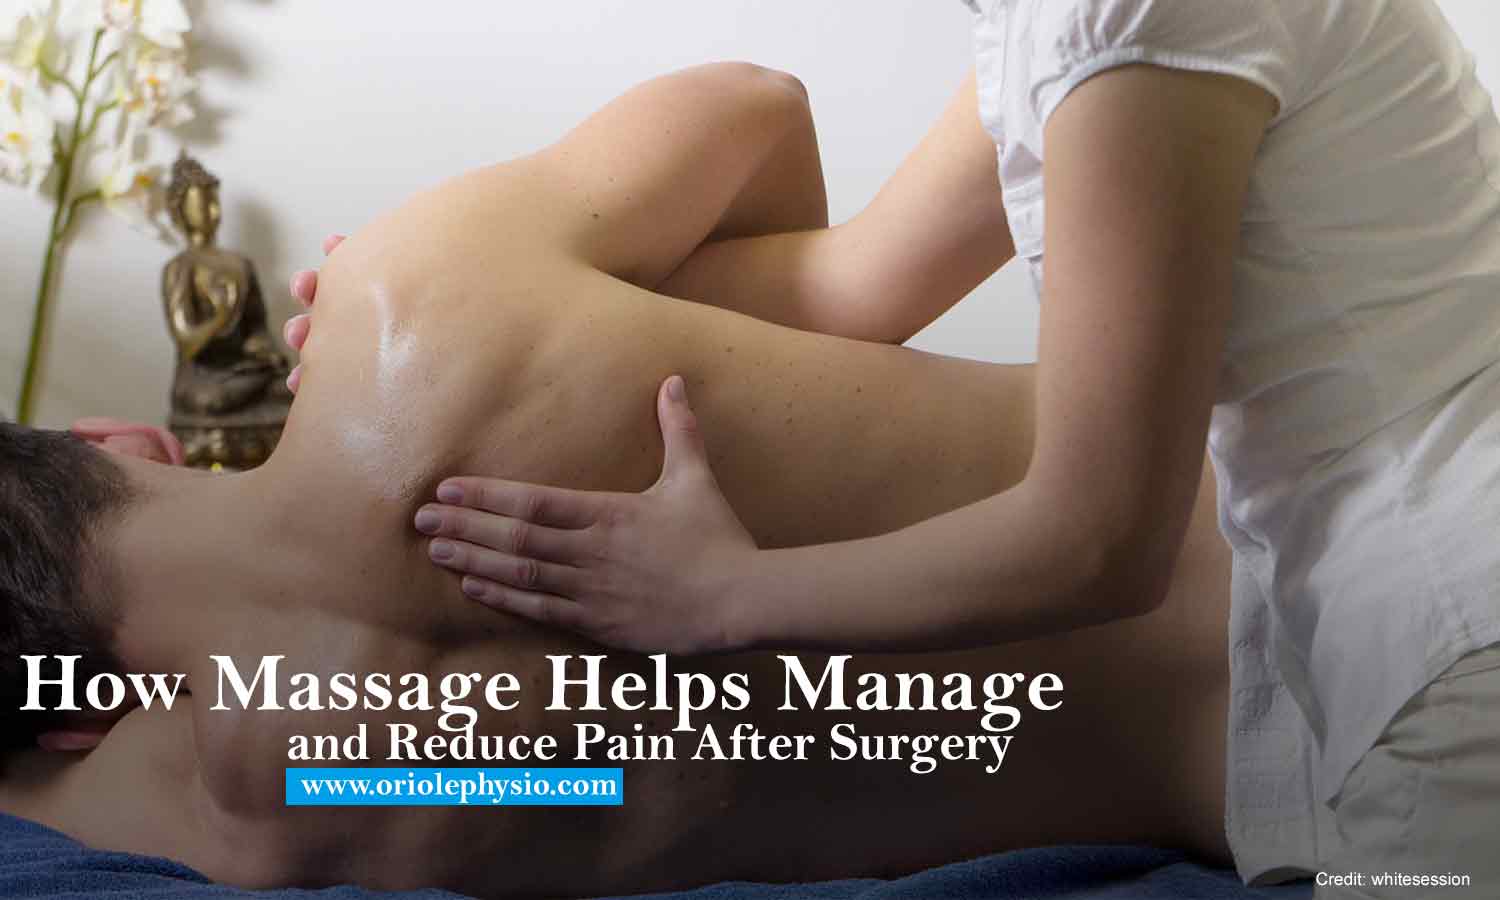 How Massage Helps Manage and Reduce Pain After Surgery